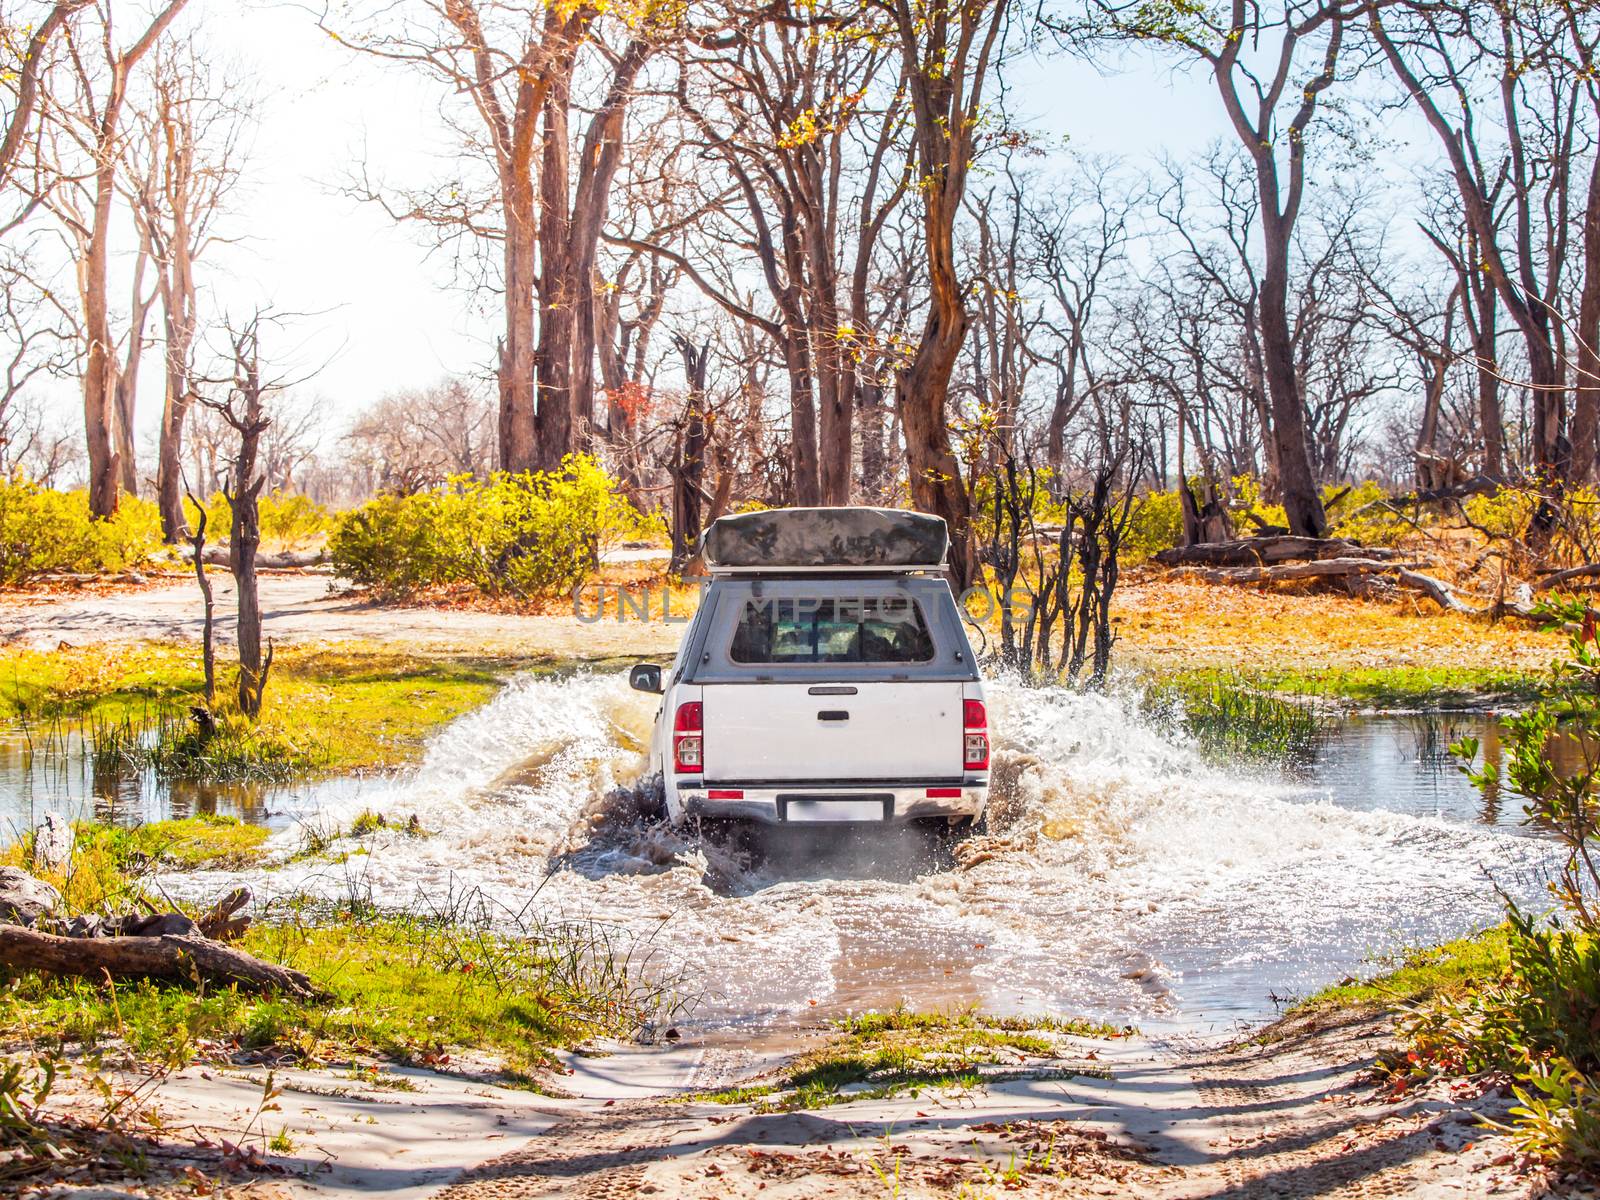 Off-road car fording water on safari wild drive in Chobe National Park, Botswana, Africa by pyty